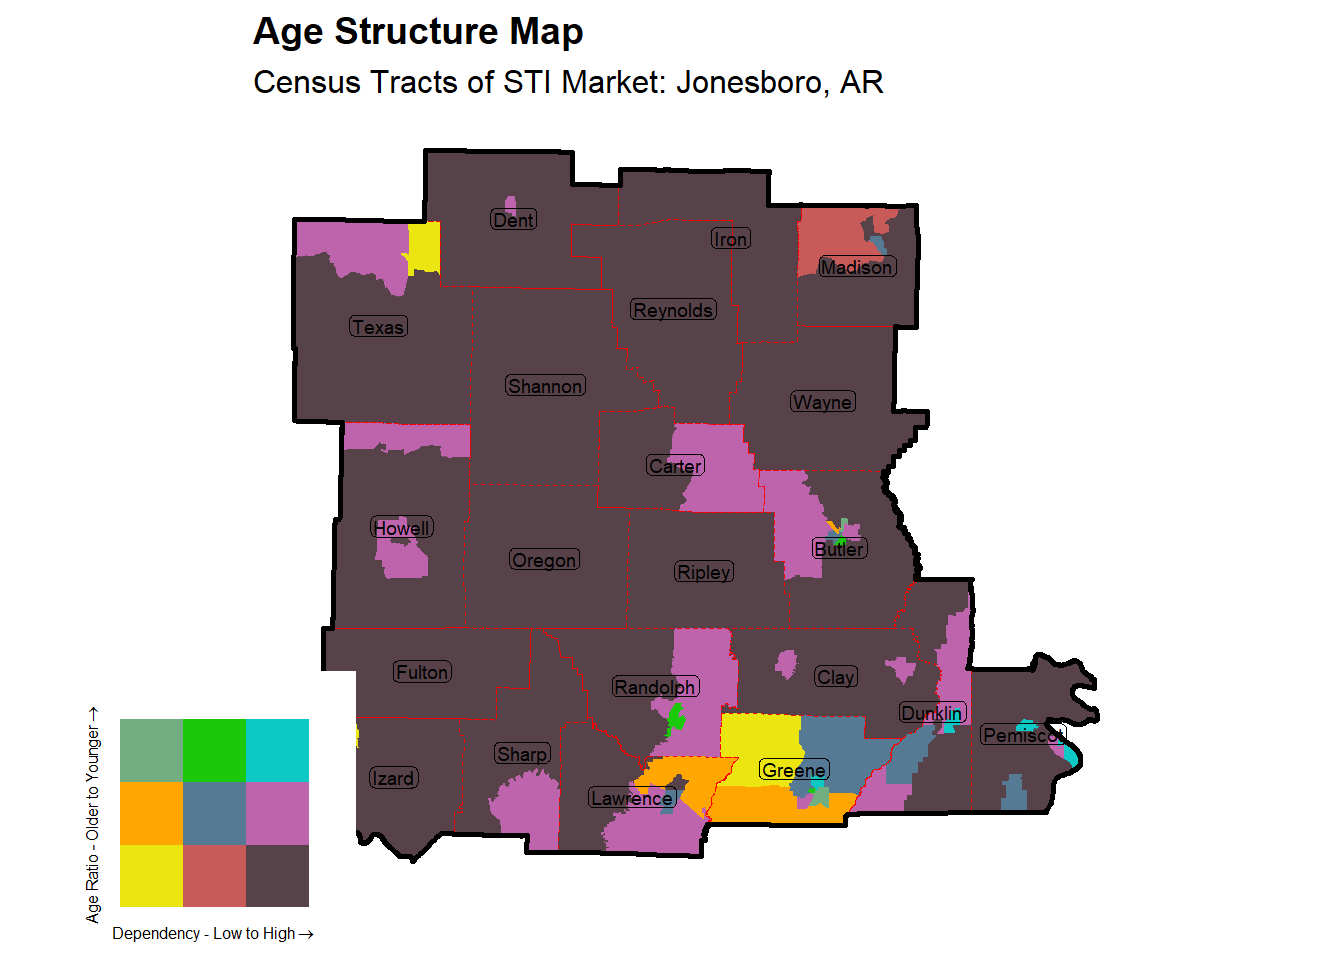 Age Structure Class by Census Tract